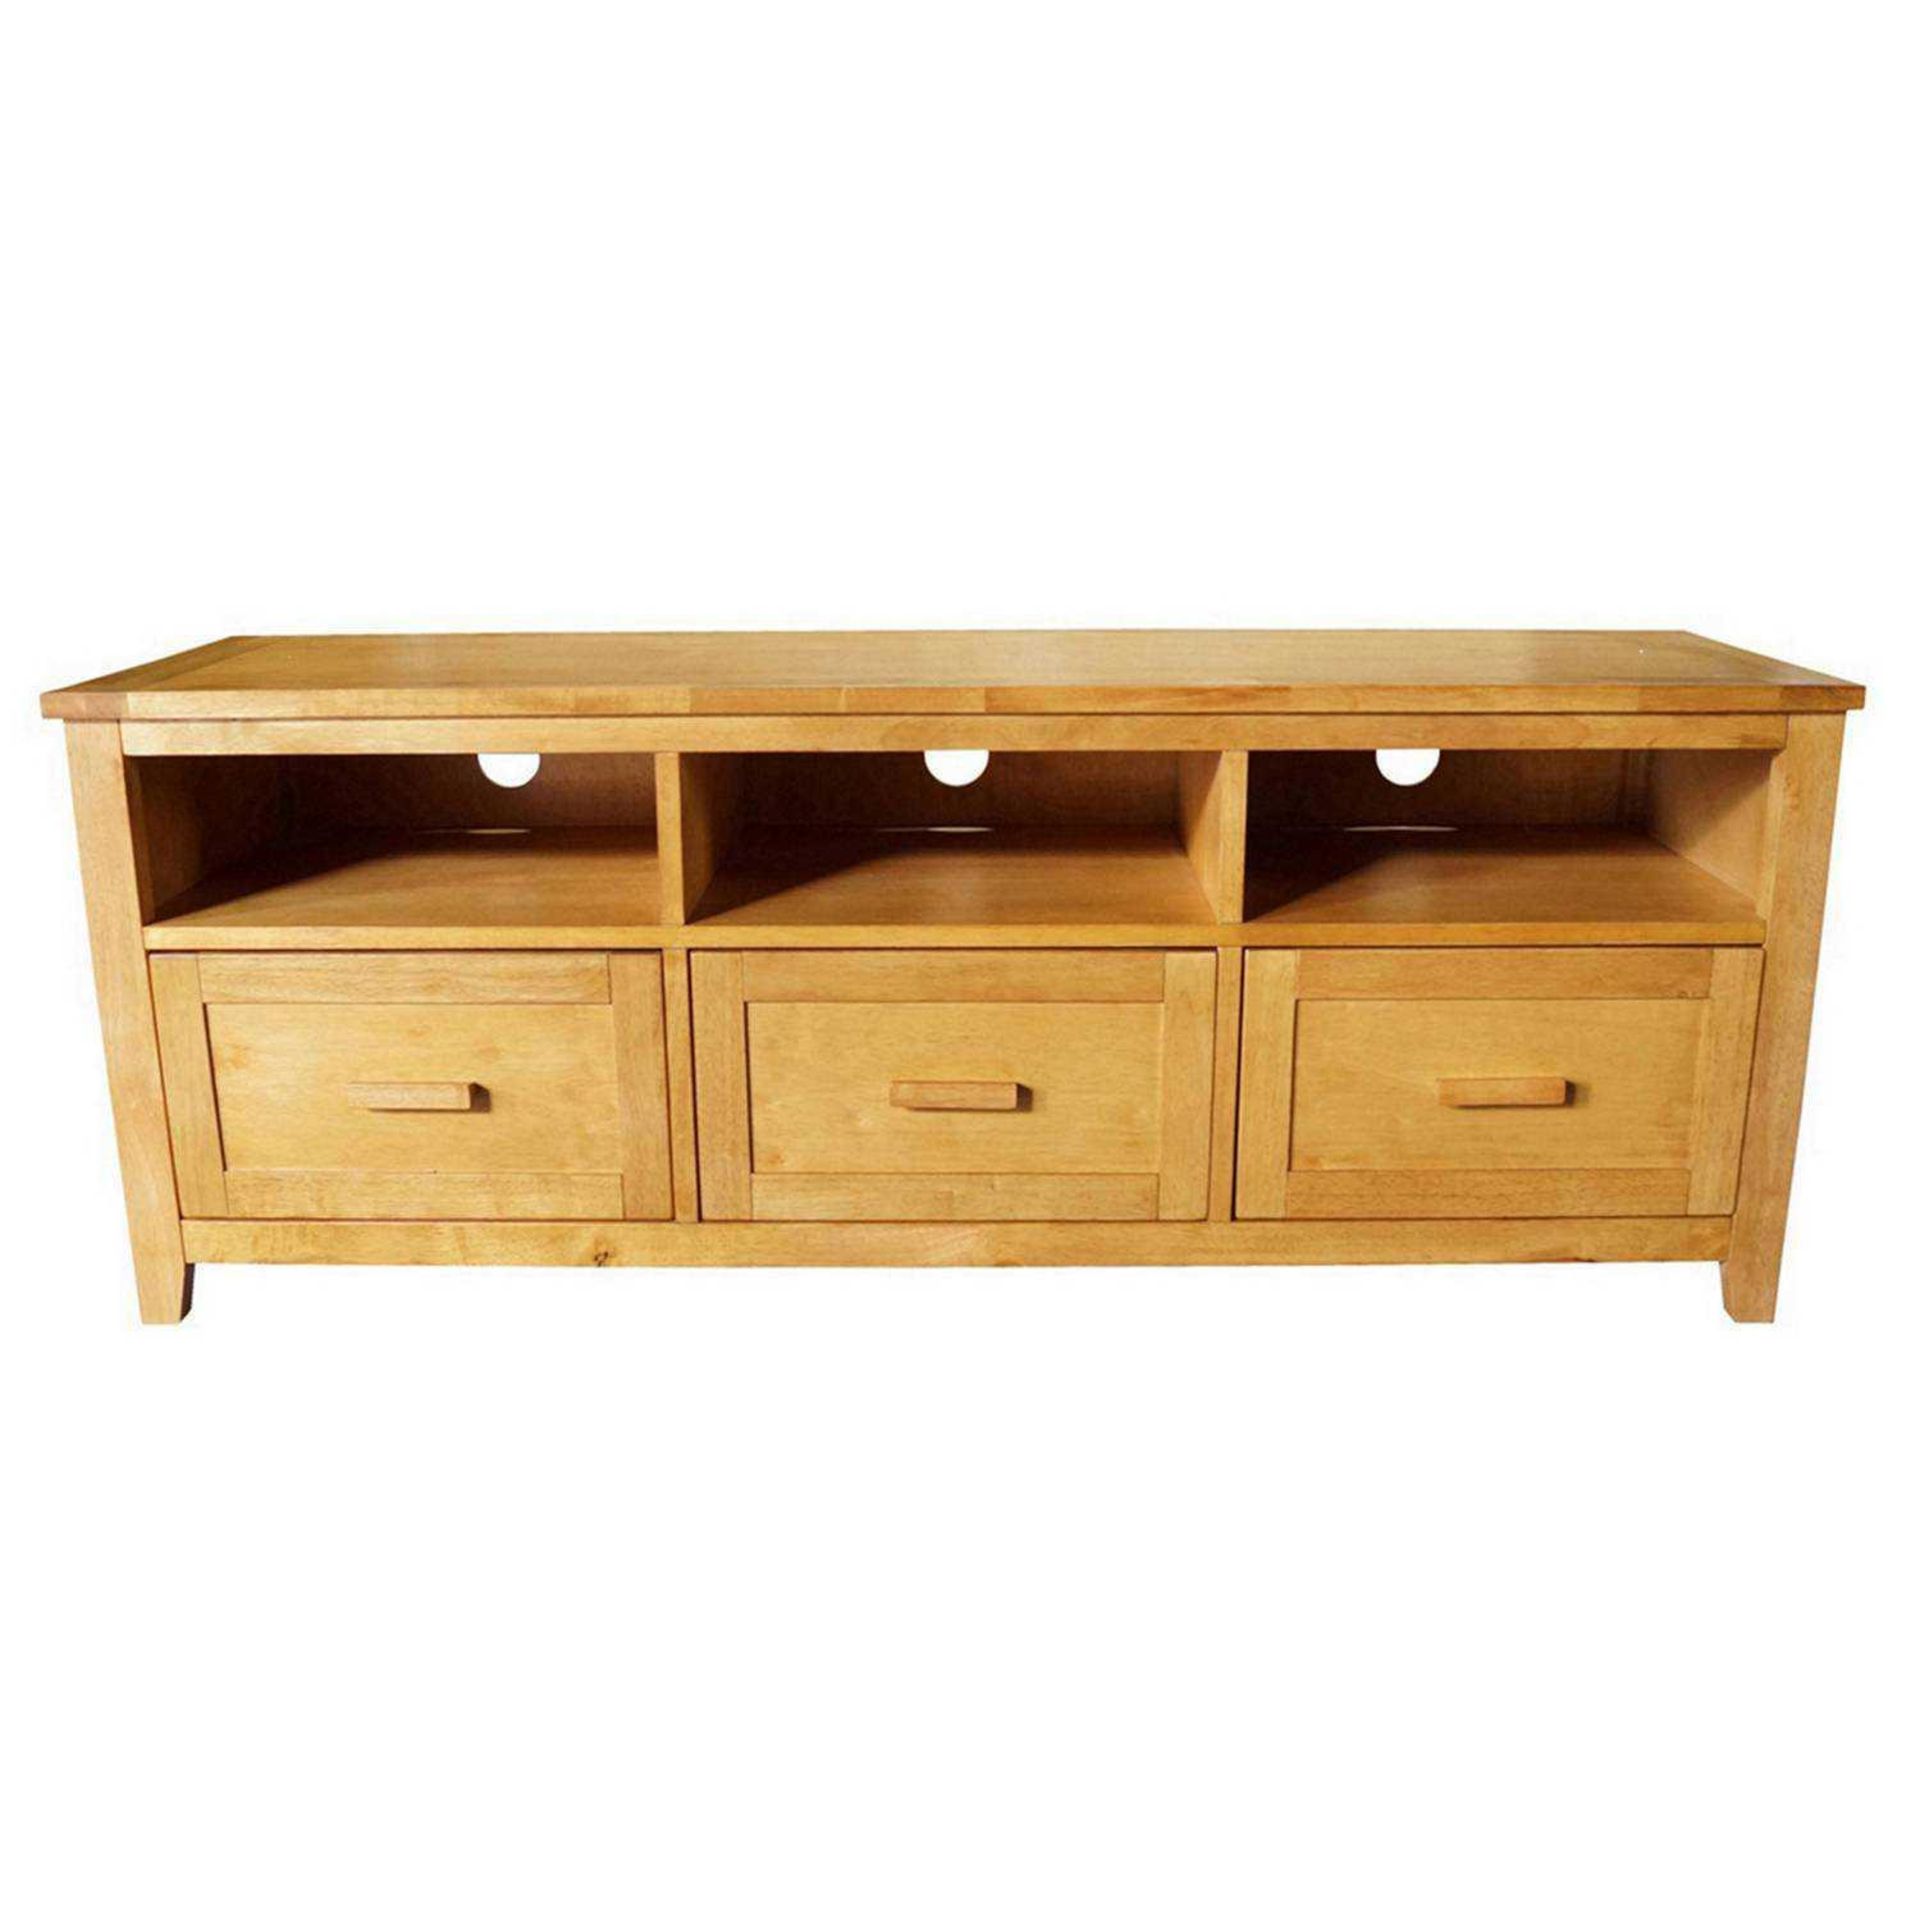 RRP £780 Brand New Boxed Fenton 3 Drawer Oak Effect Tv Unit (Appraisals Available On Request) (